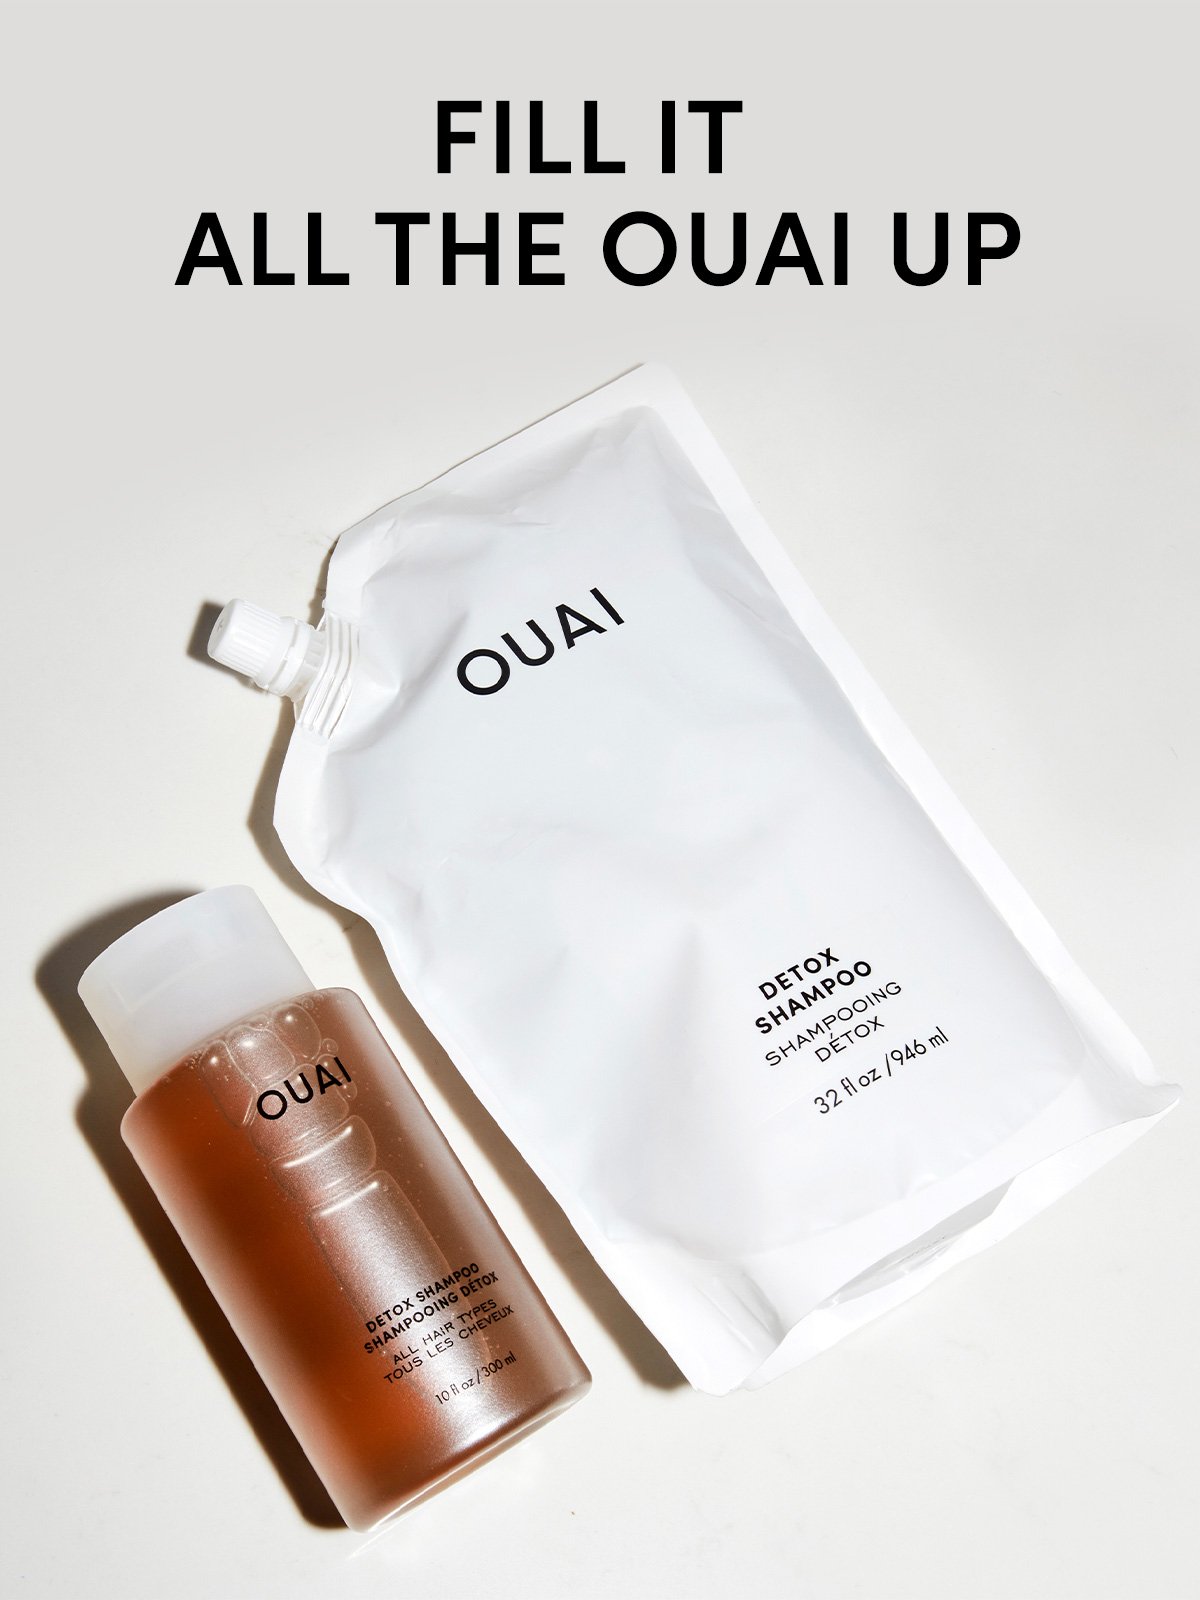 Fill it all the OUAI up